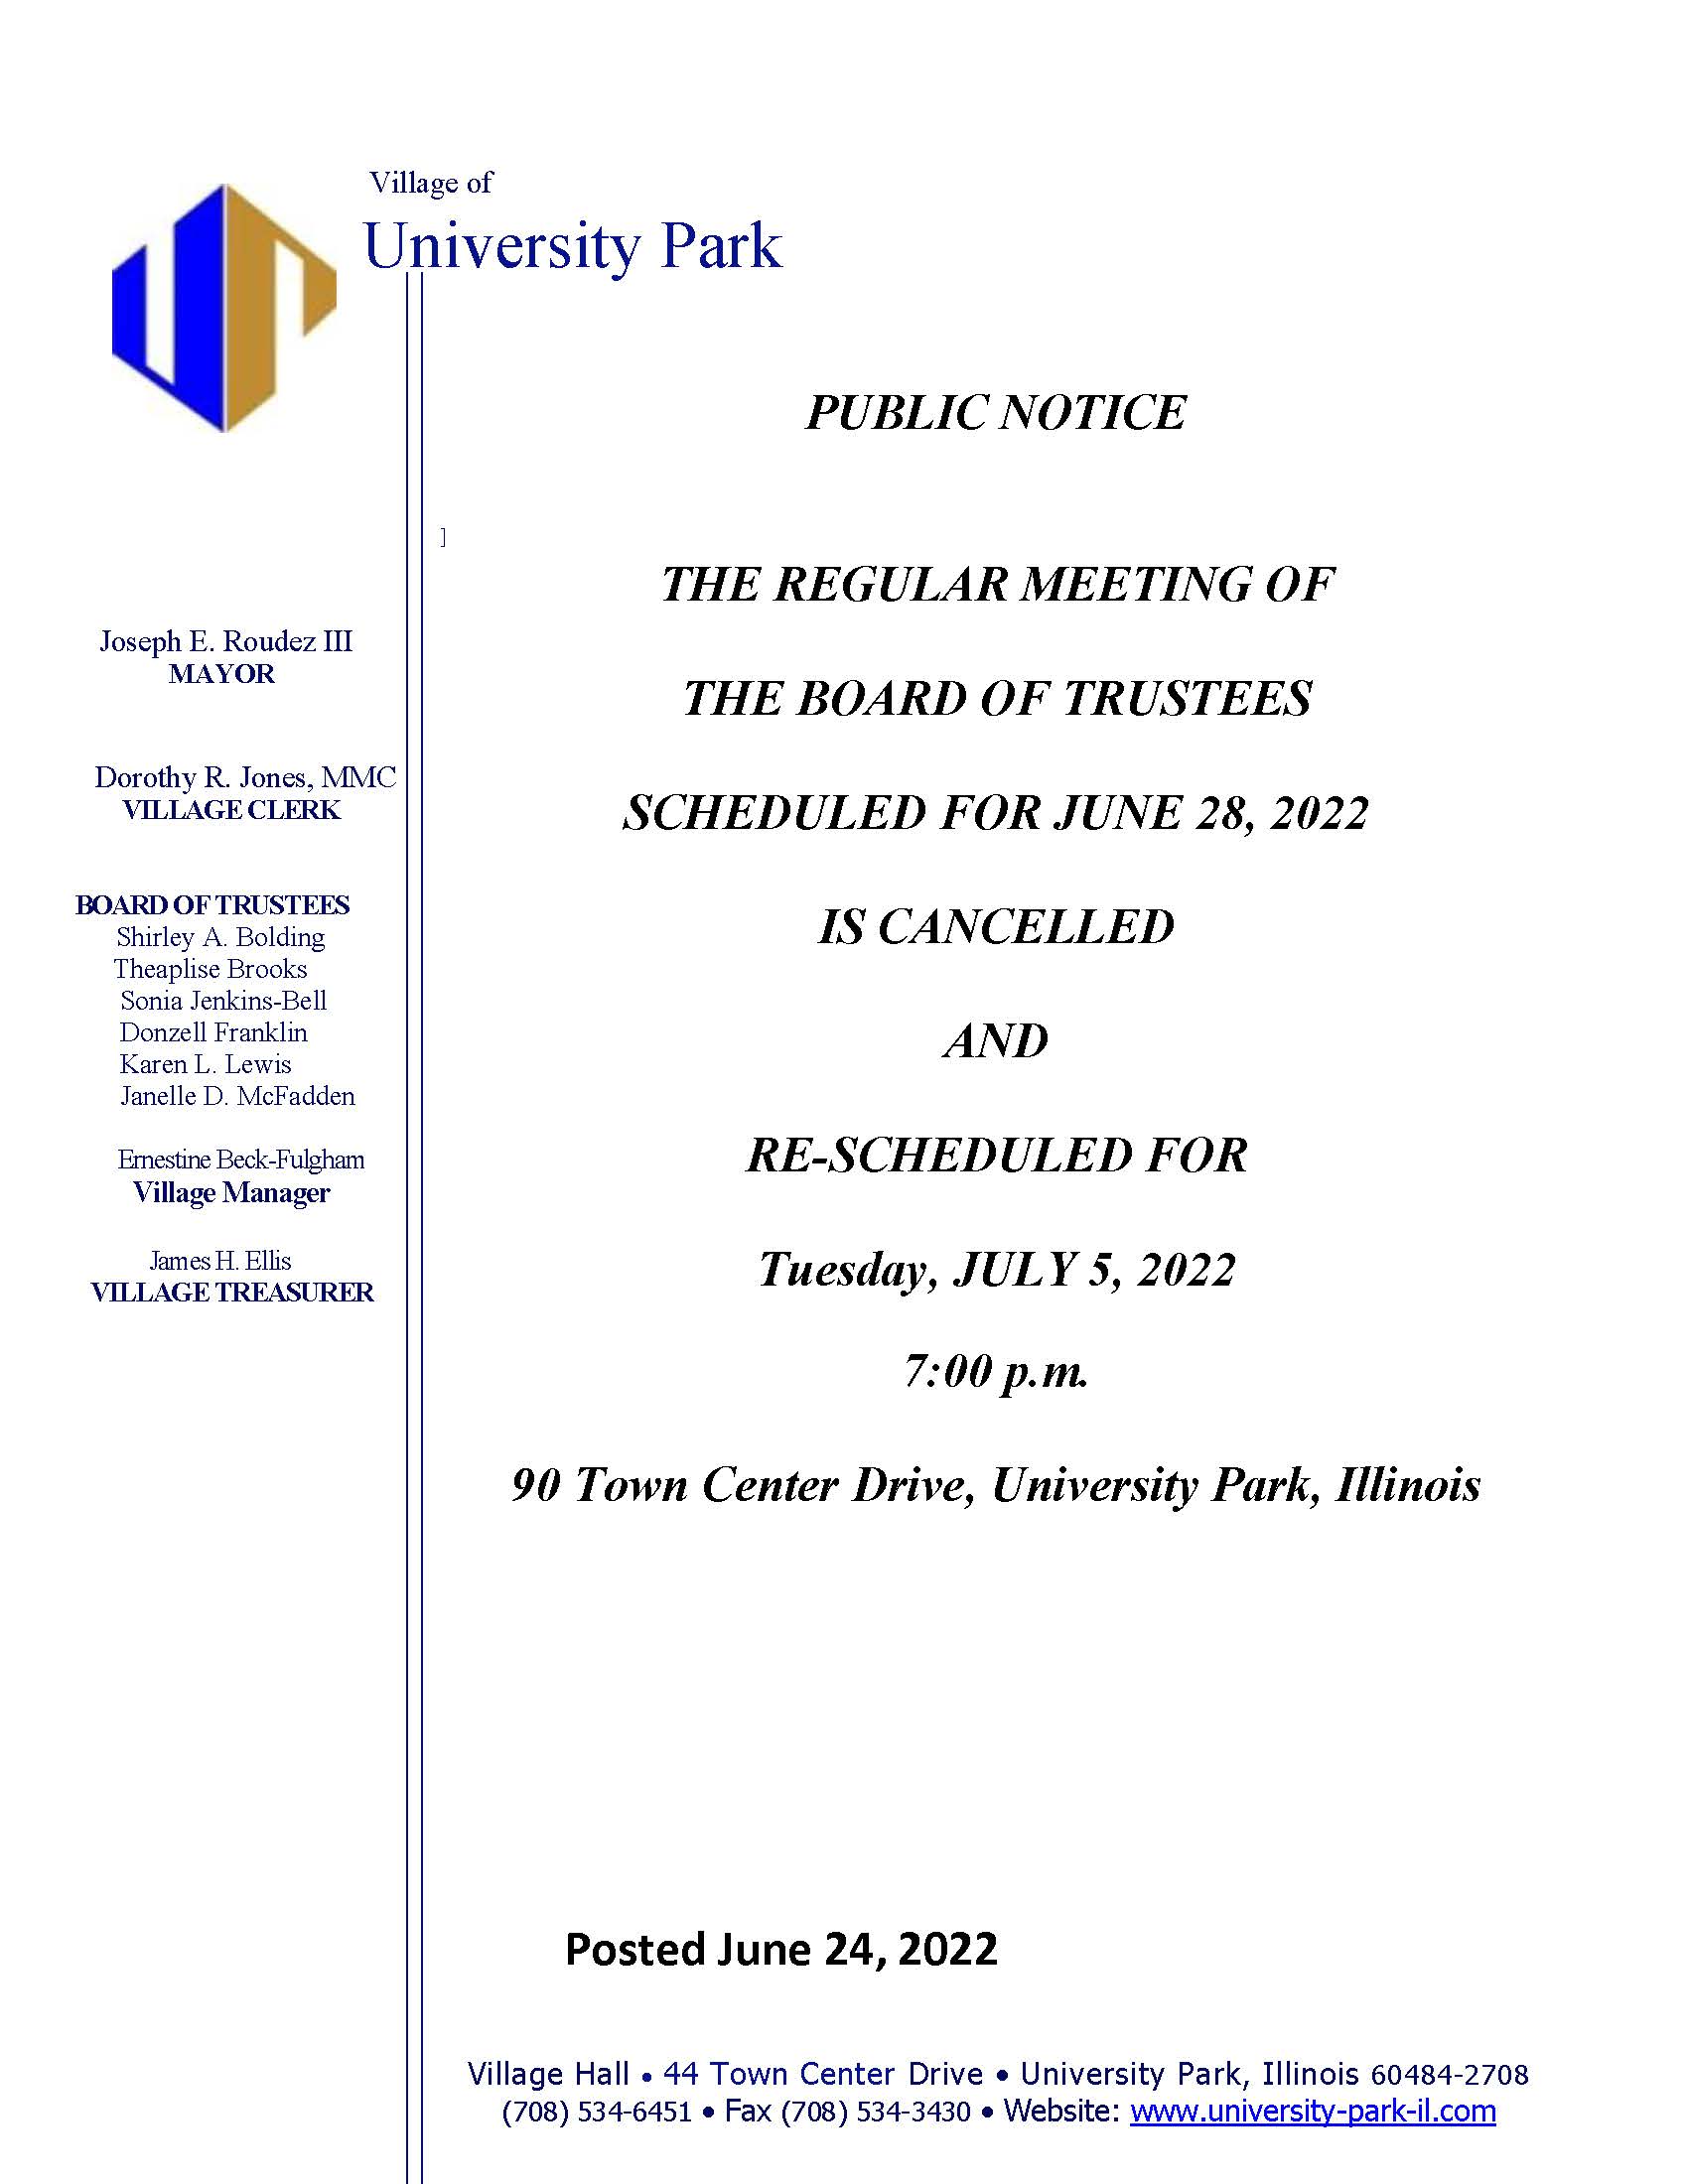 2022 PUBLIC NOTCE - MEETING CANCELLATION (06-28)_Page_1